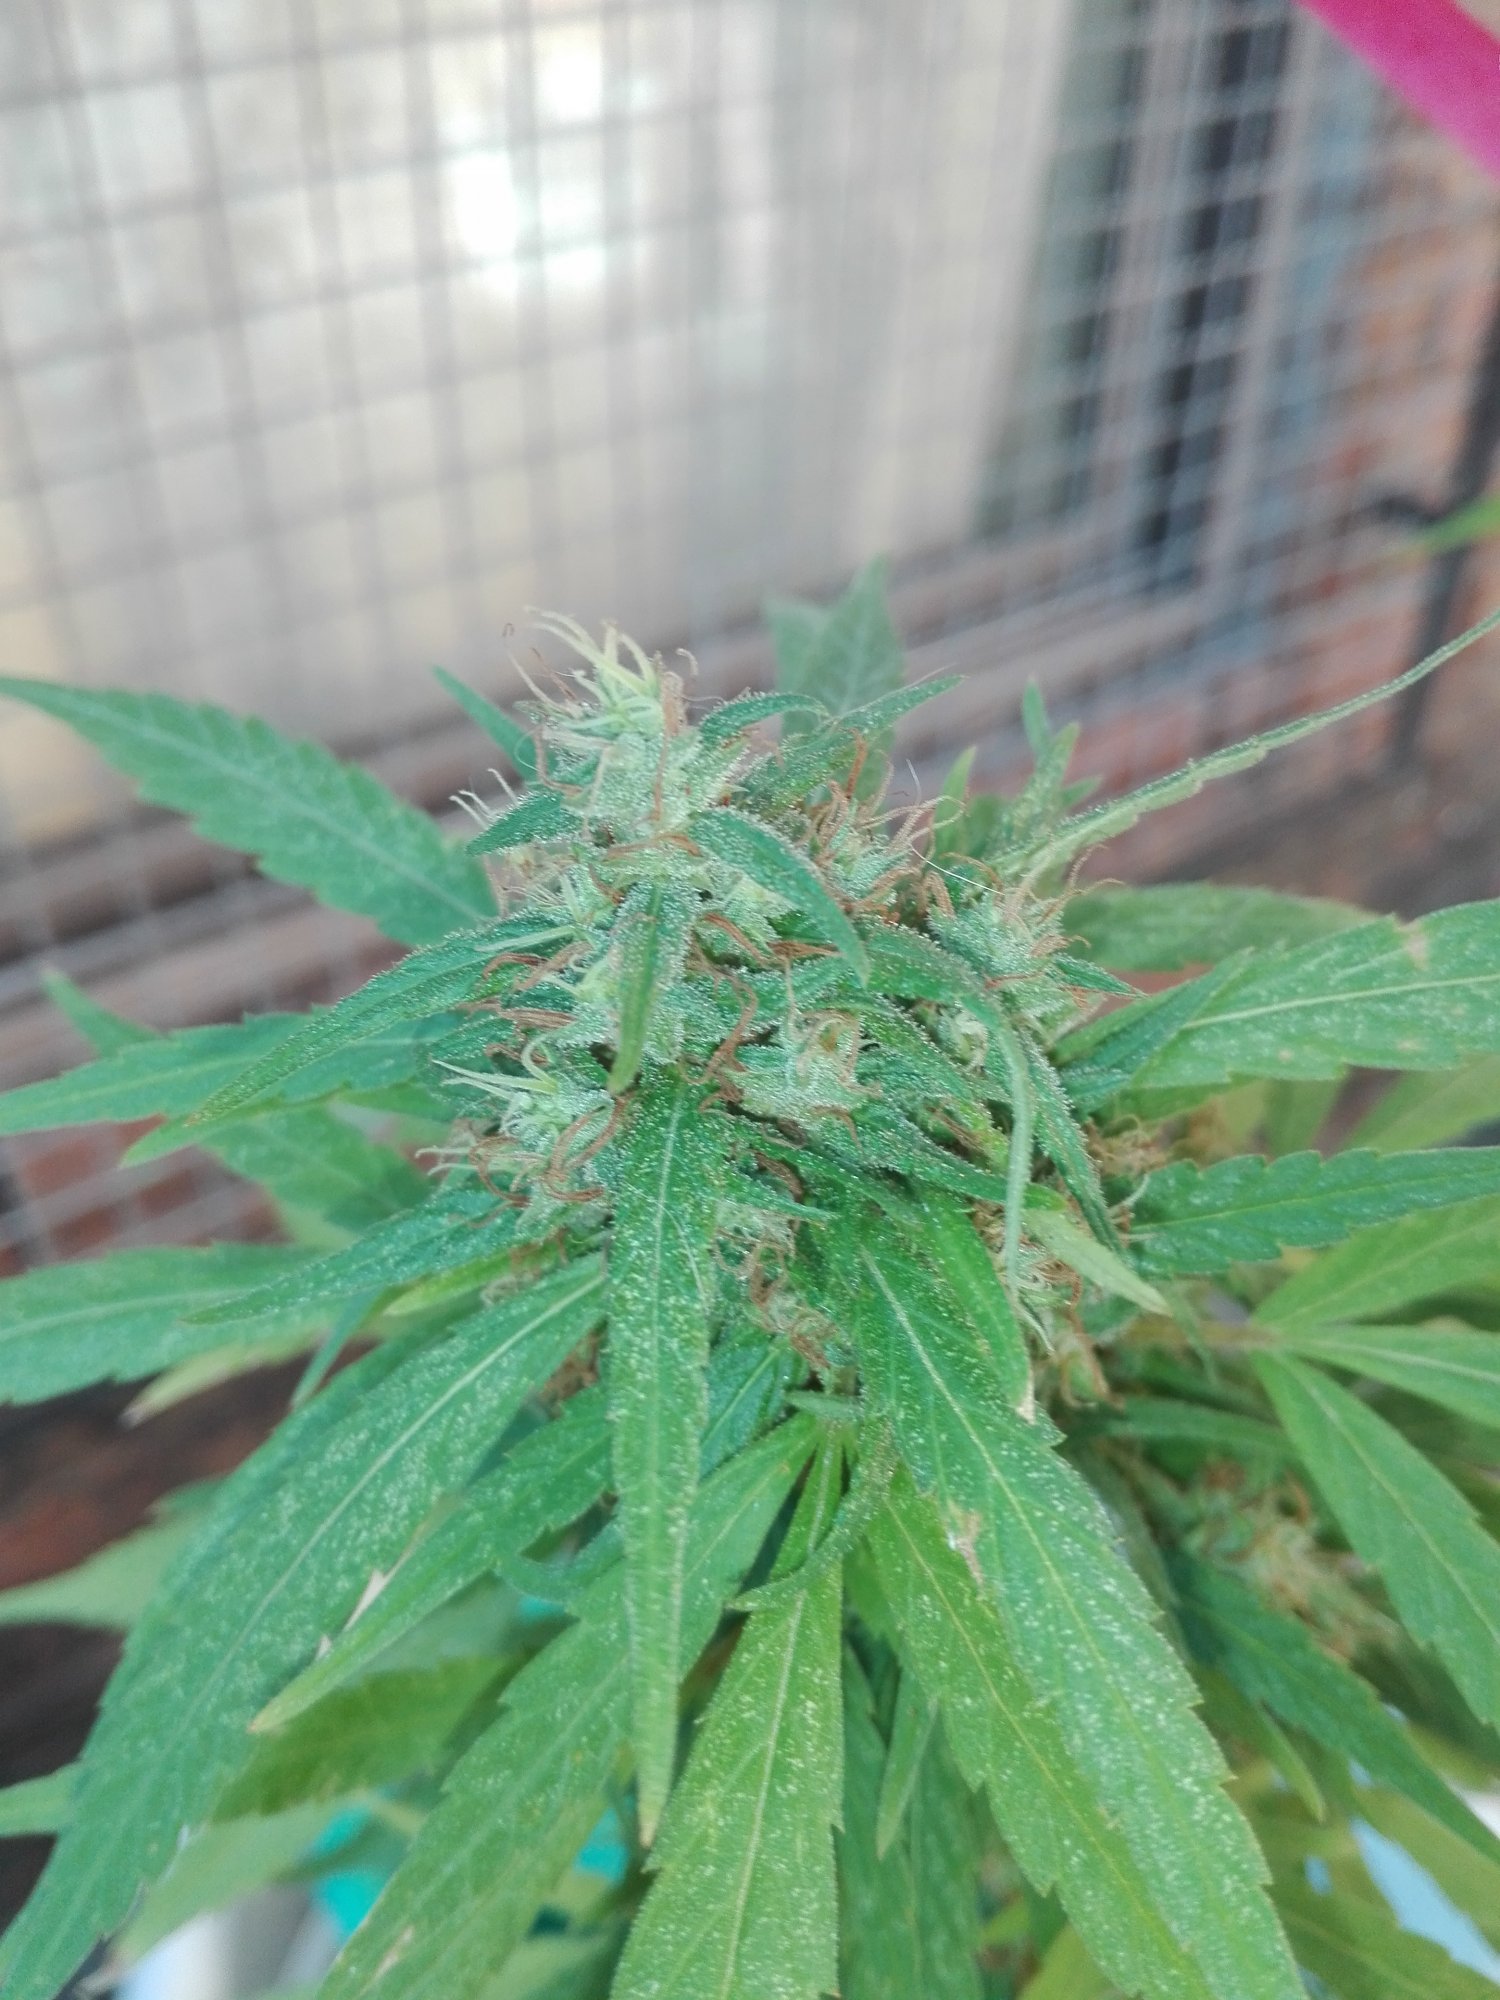 New grower   question harvest time 4